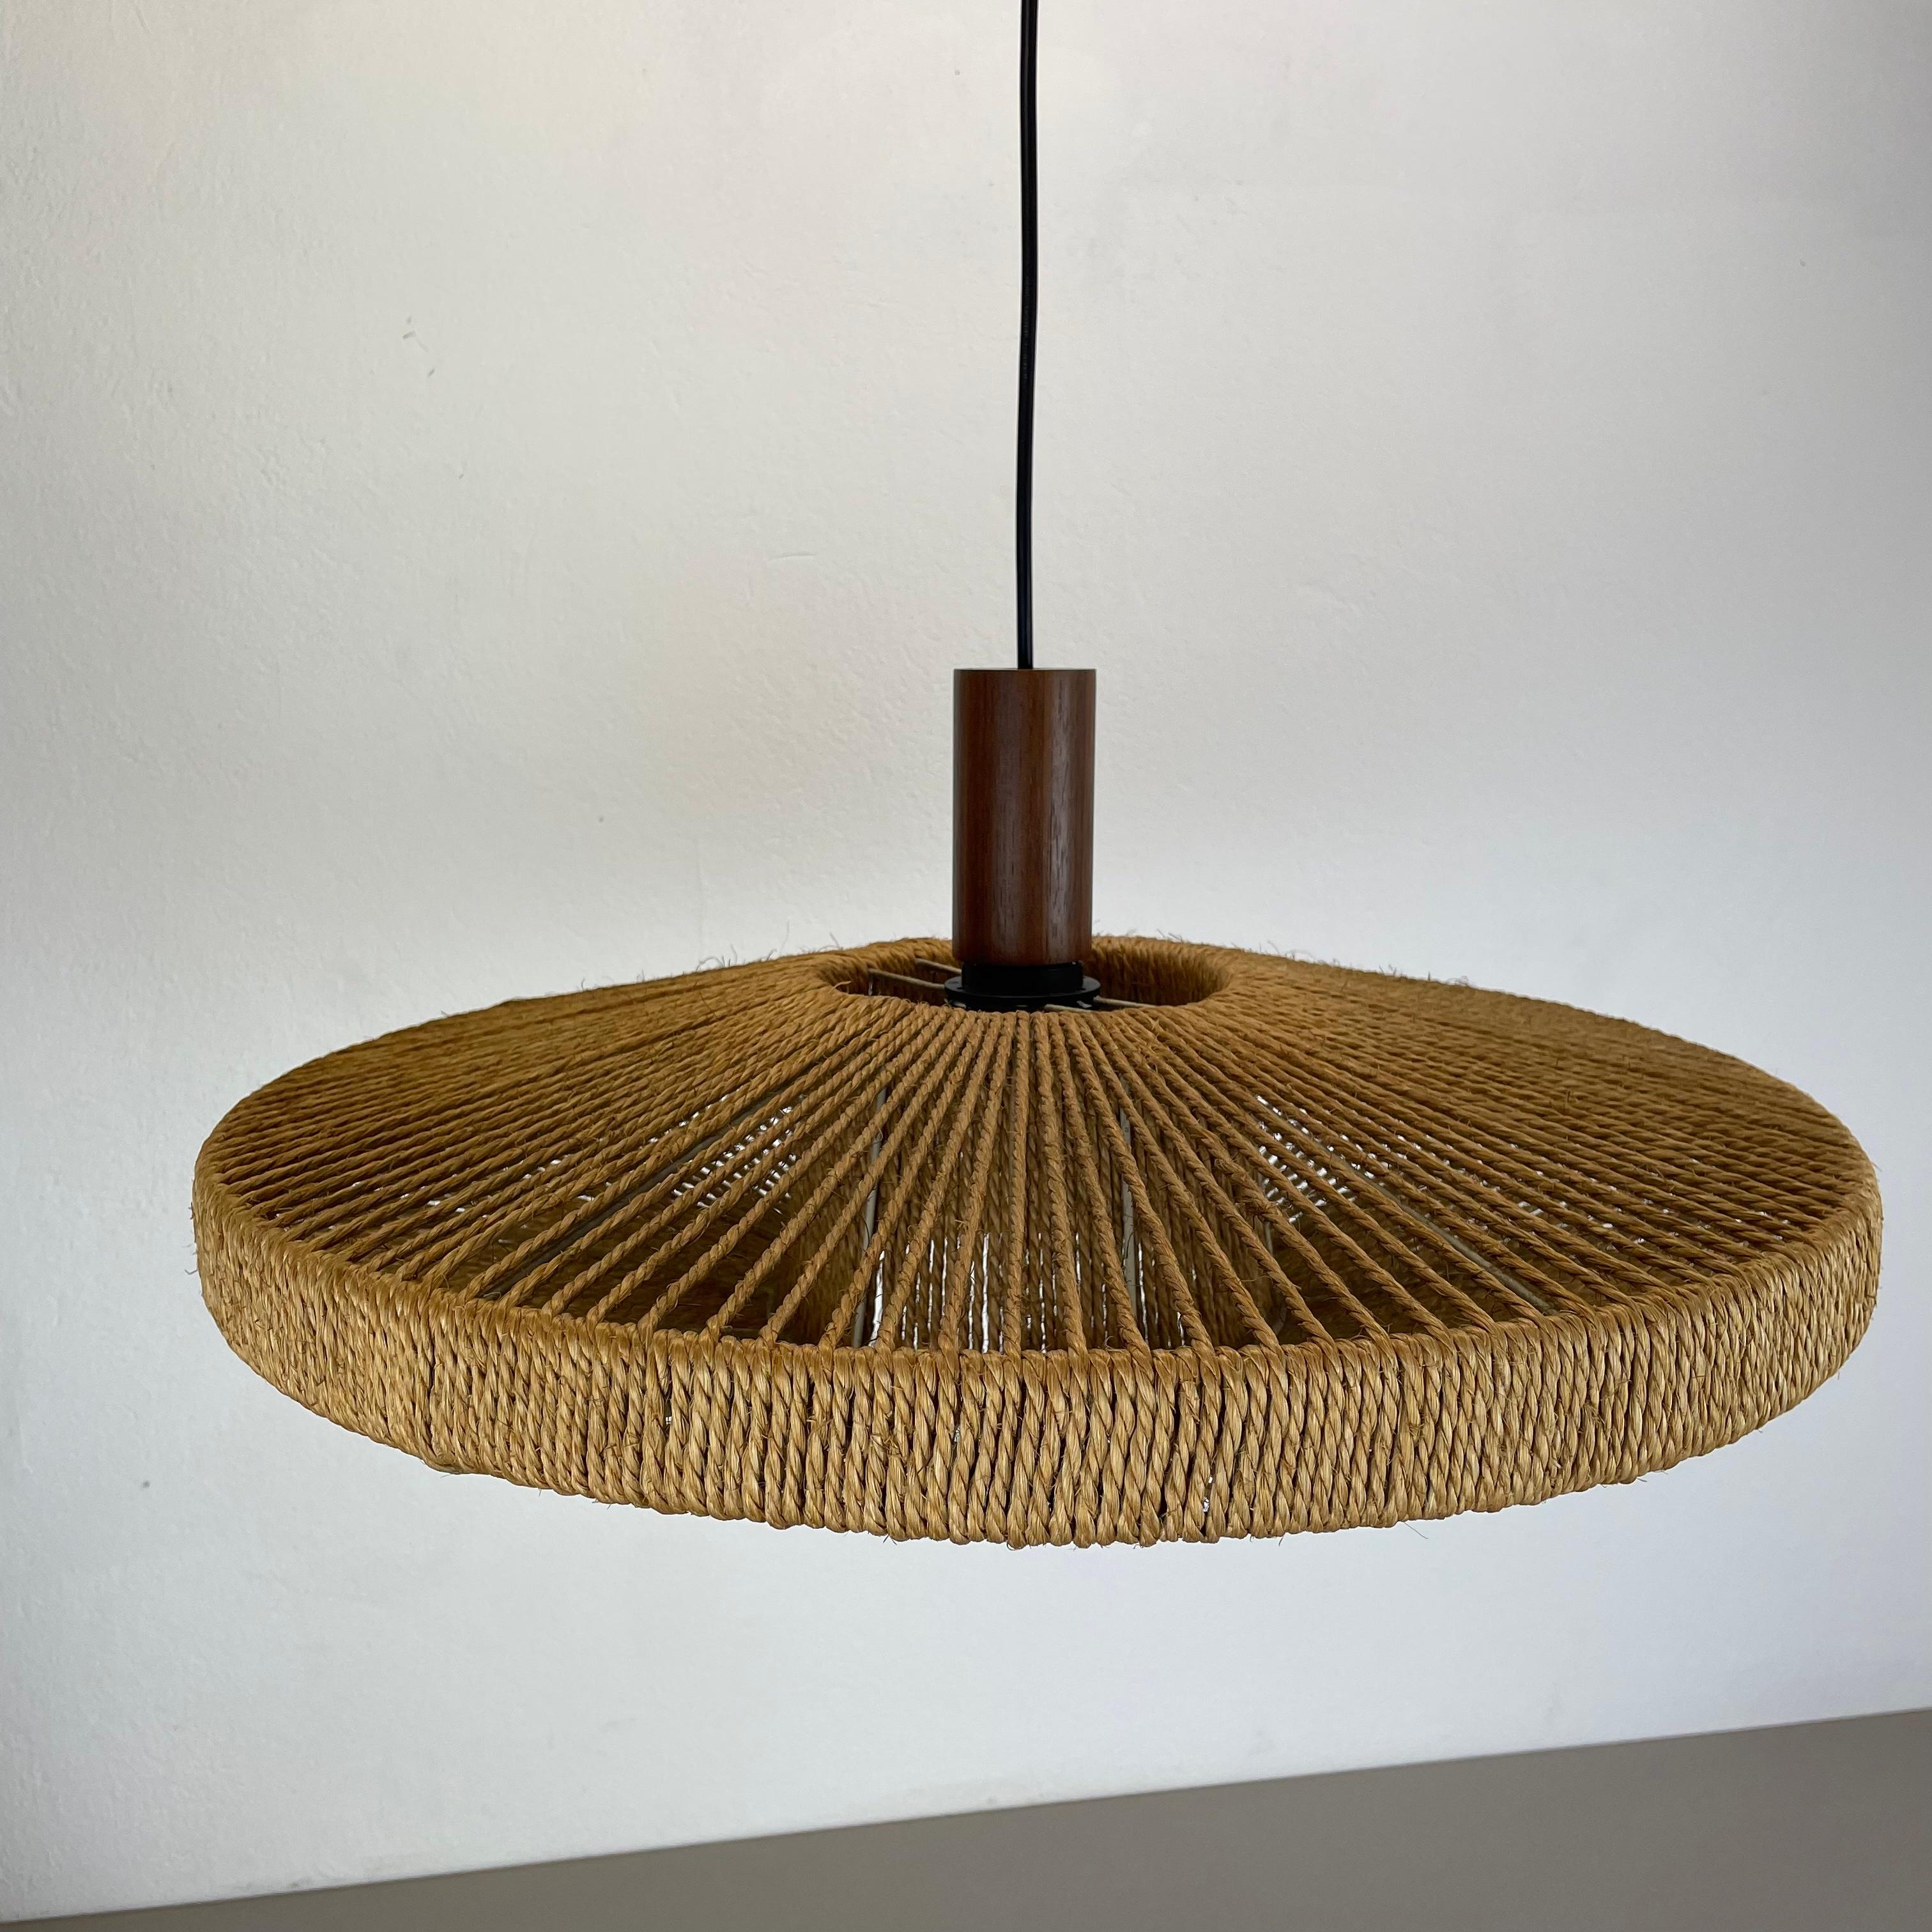 56cm Organic Sisal and Teak Ufo Hanging Light Made by Temde Lights Germany 1960s For Sale 4